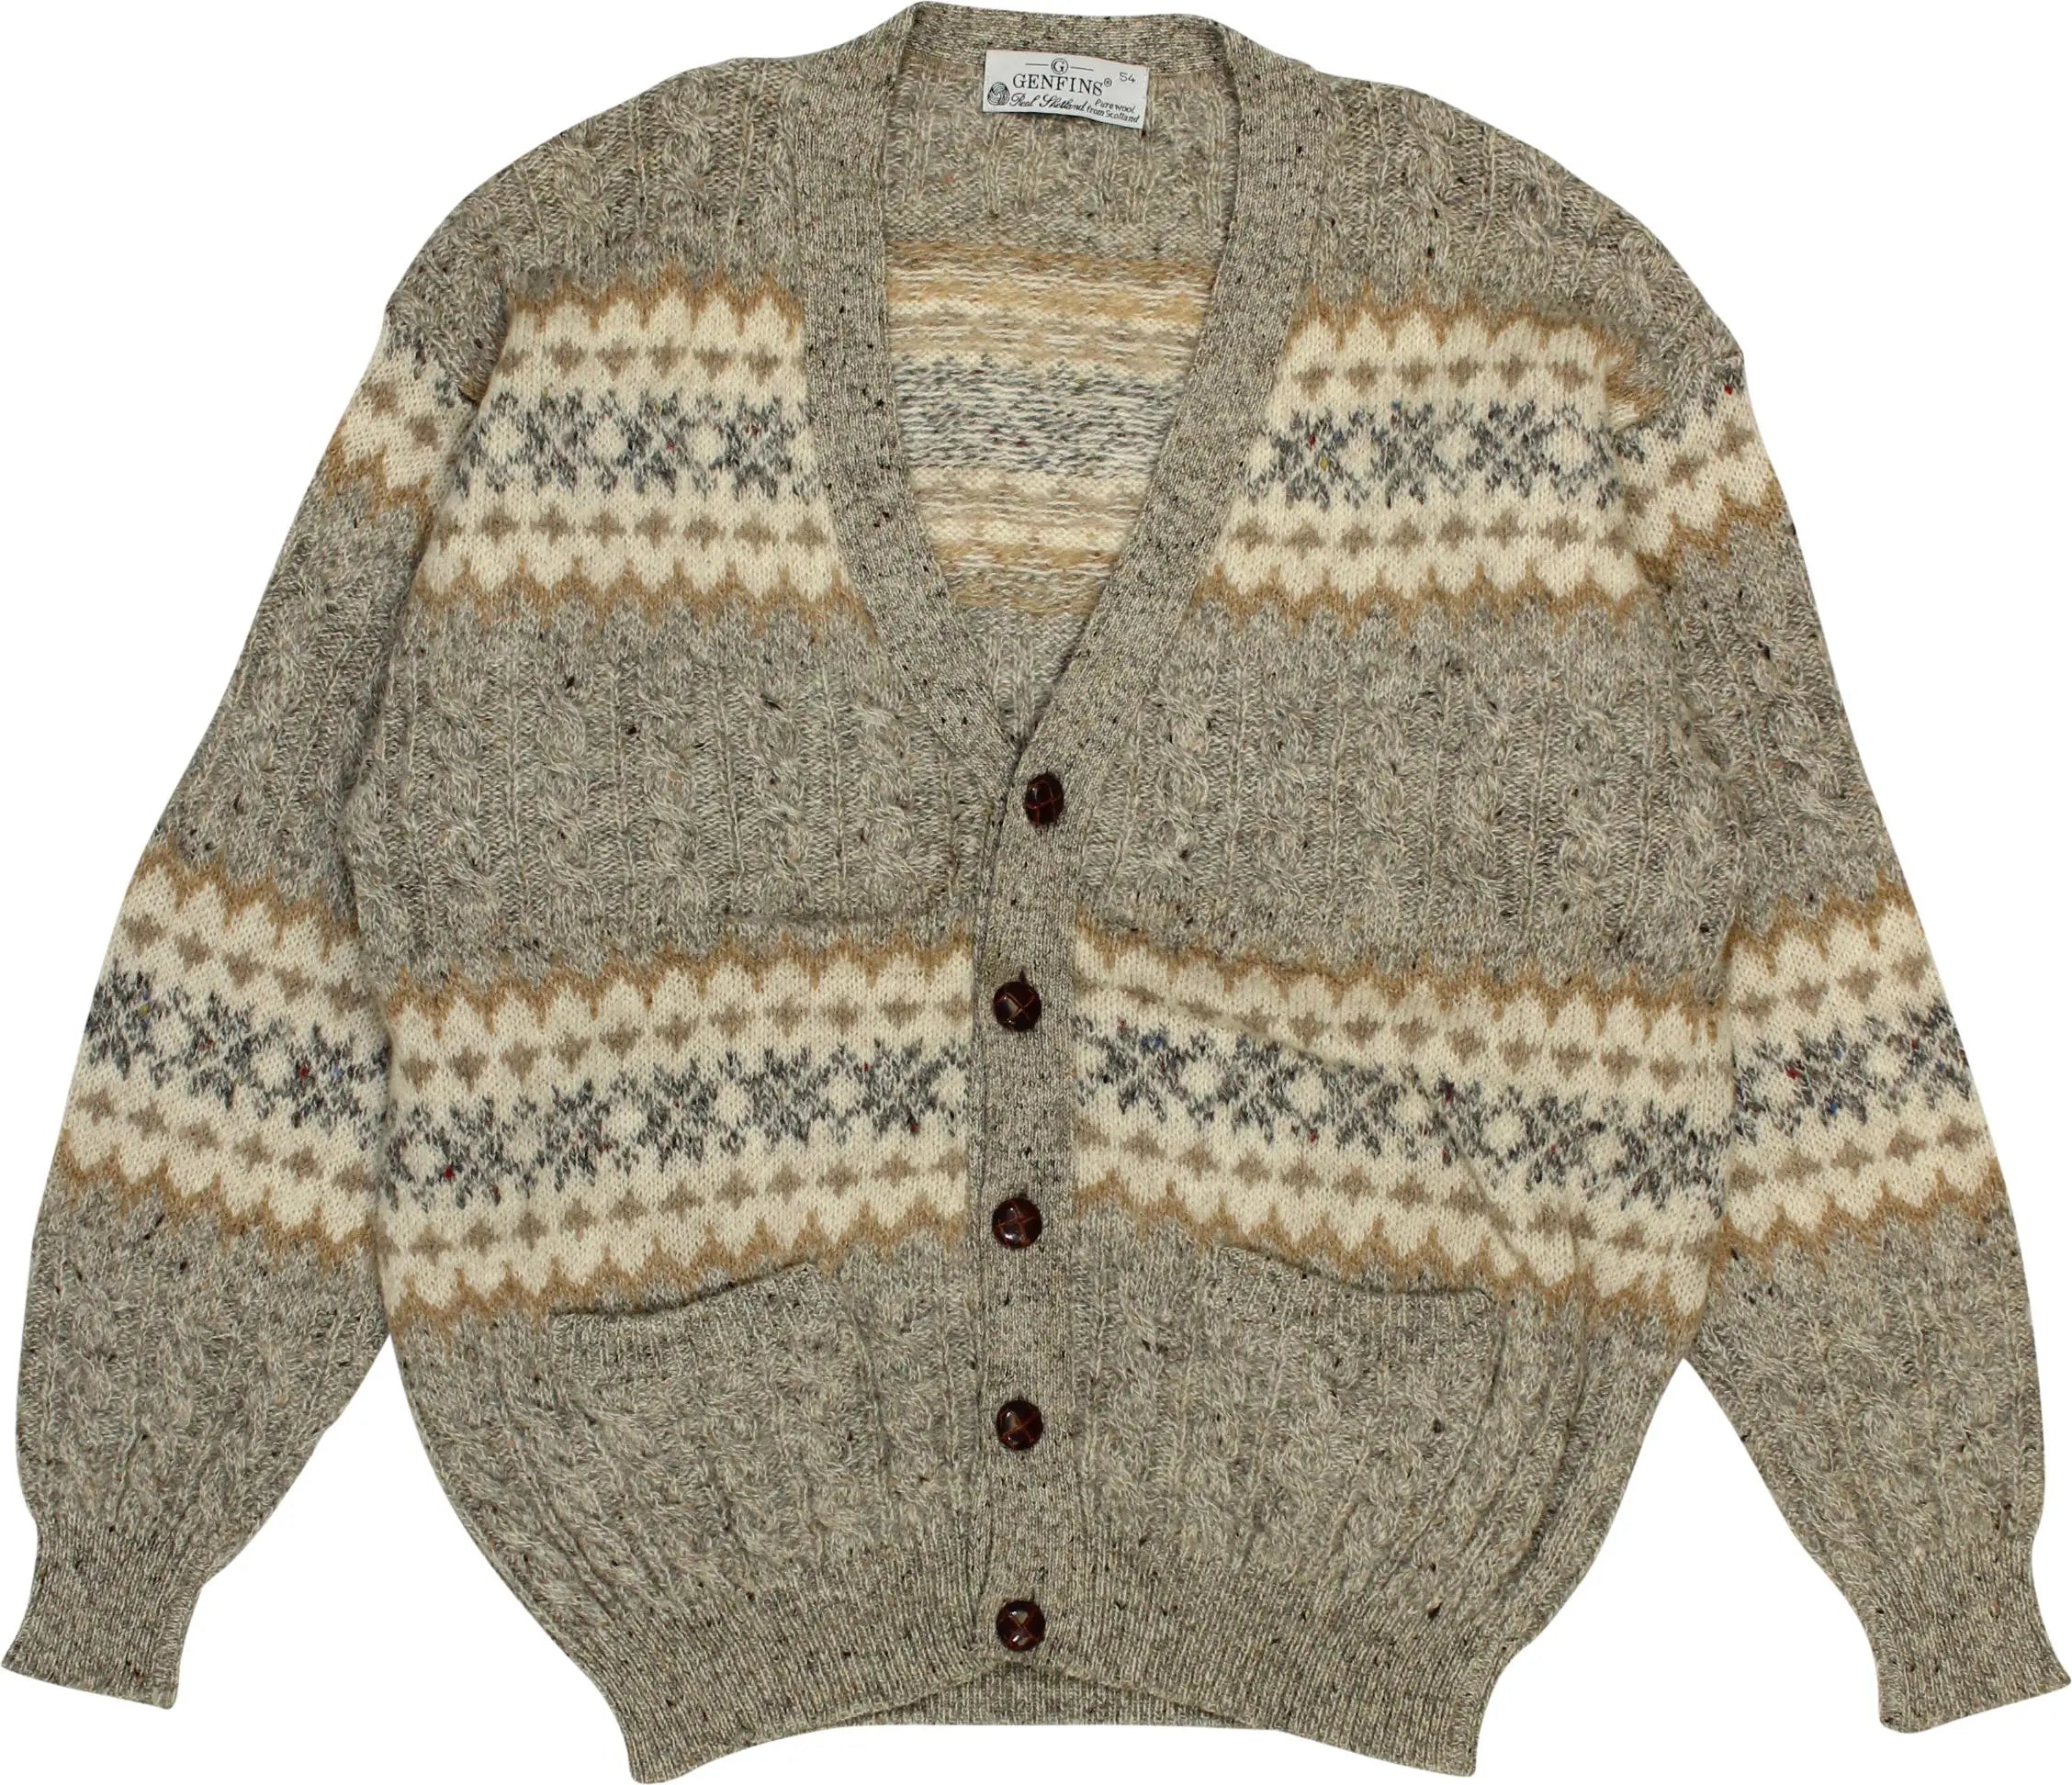 Genfins - Scottish Wool Cardigan- ThriftTale.com - Vintage and second handclothing